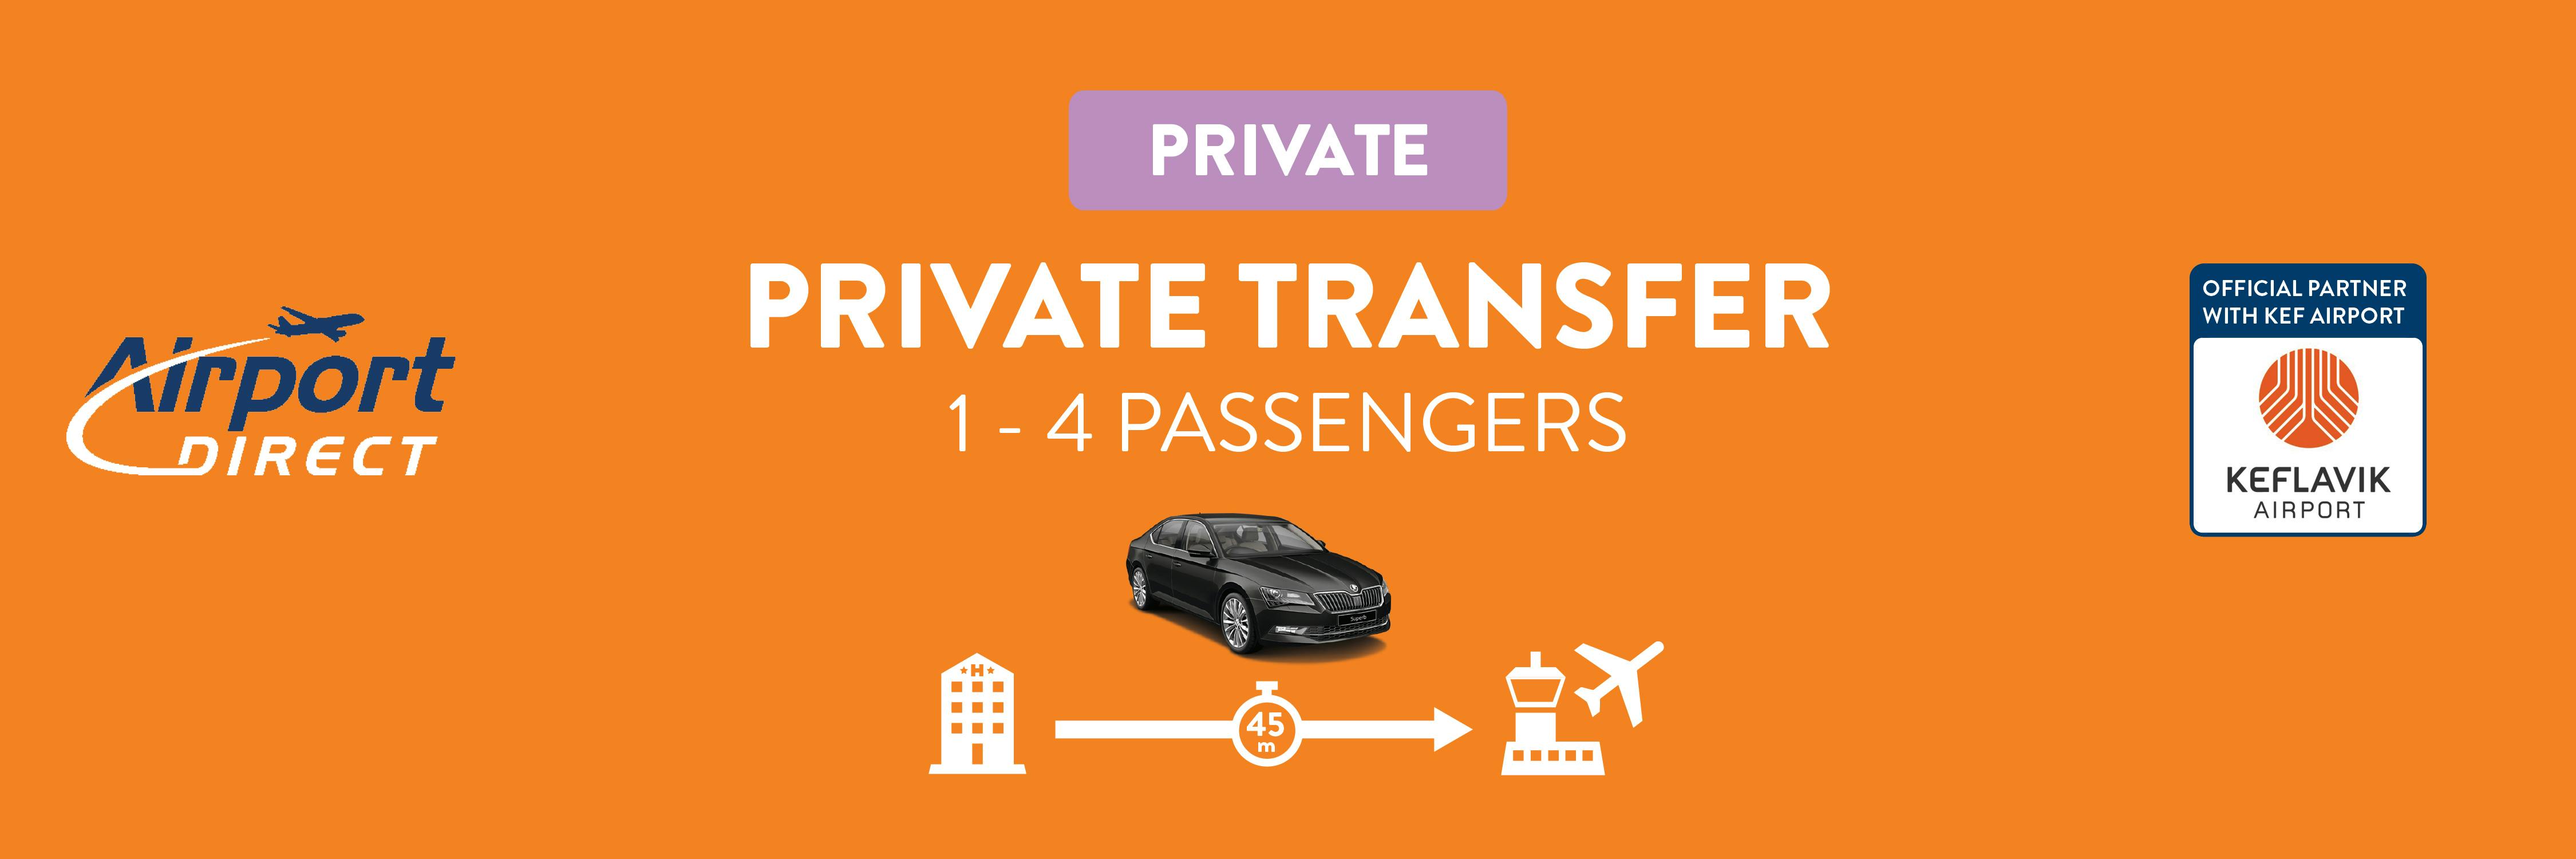 You can book a direct transfer for 1-4 passengers from Keflavik to Reykjavik.